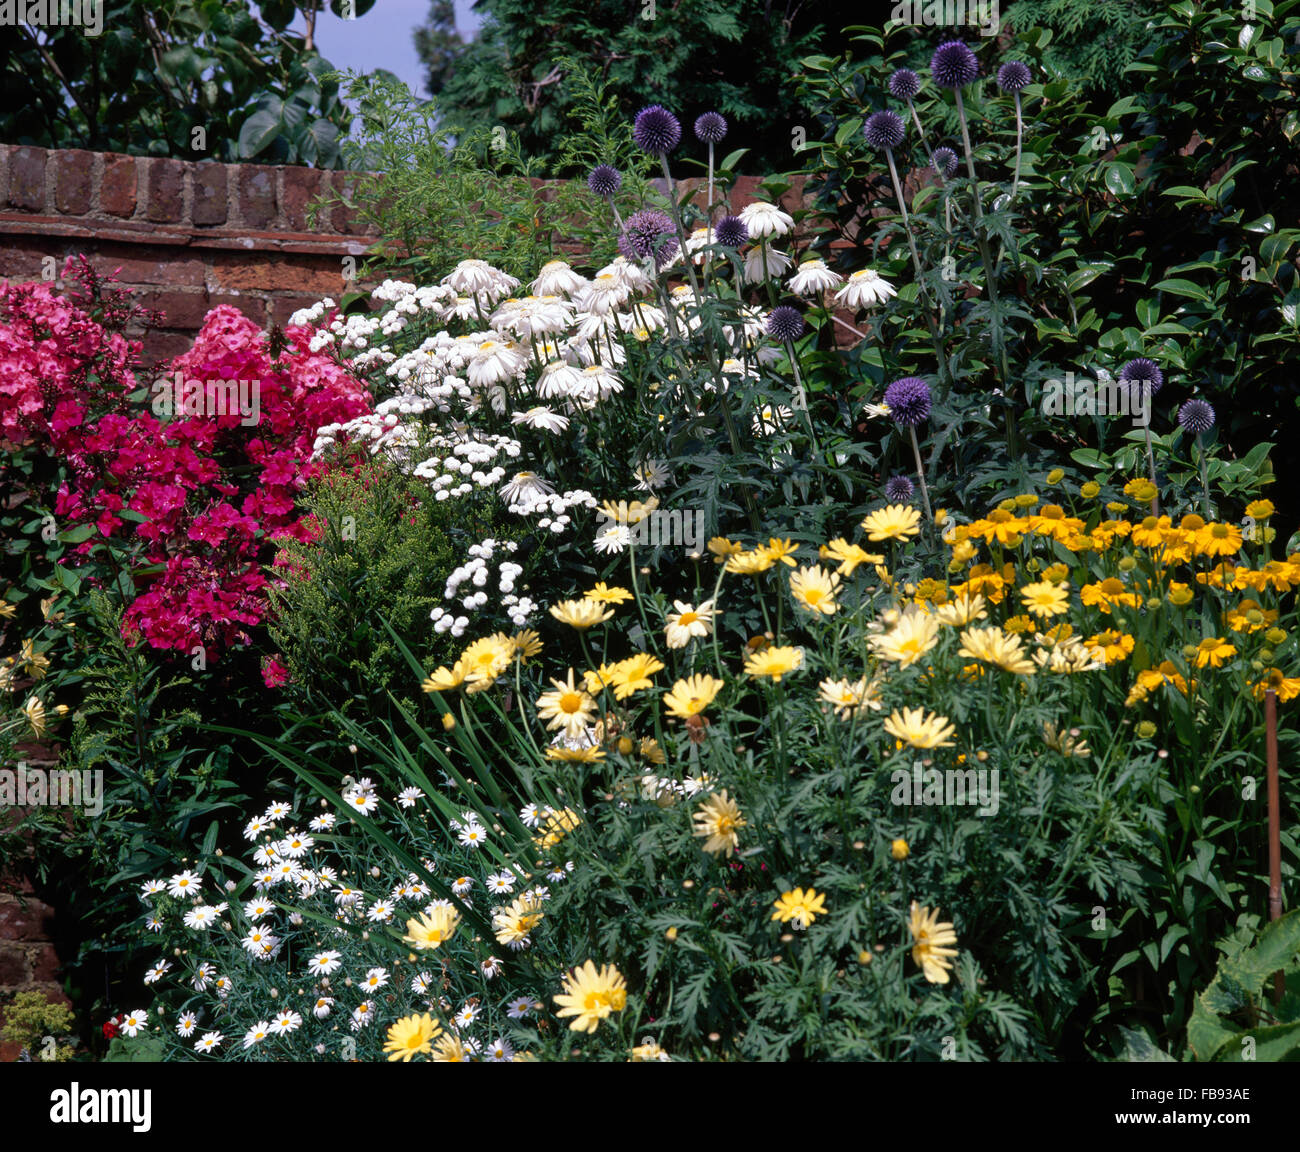 Bright pink phlox with yellow anthemis and rudbeckia in large summer border with blue echinops and white daisies Stock Photo